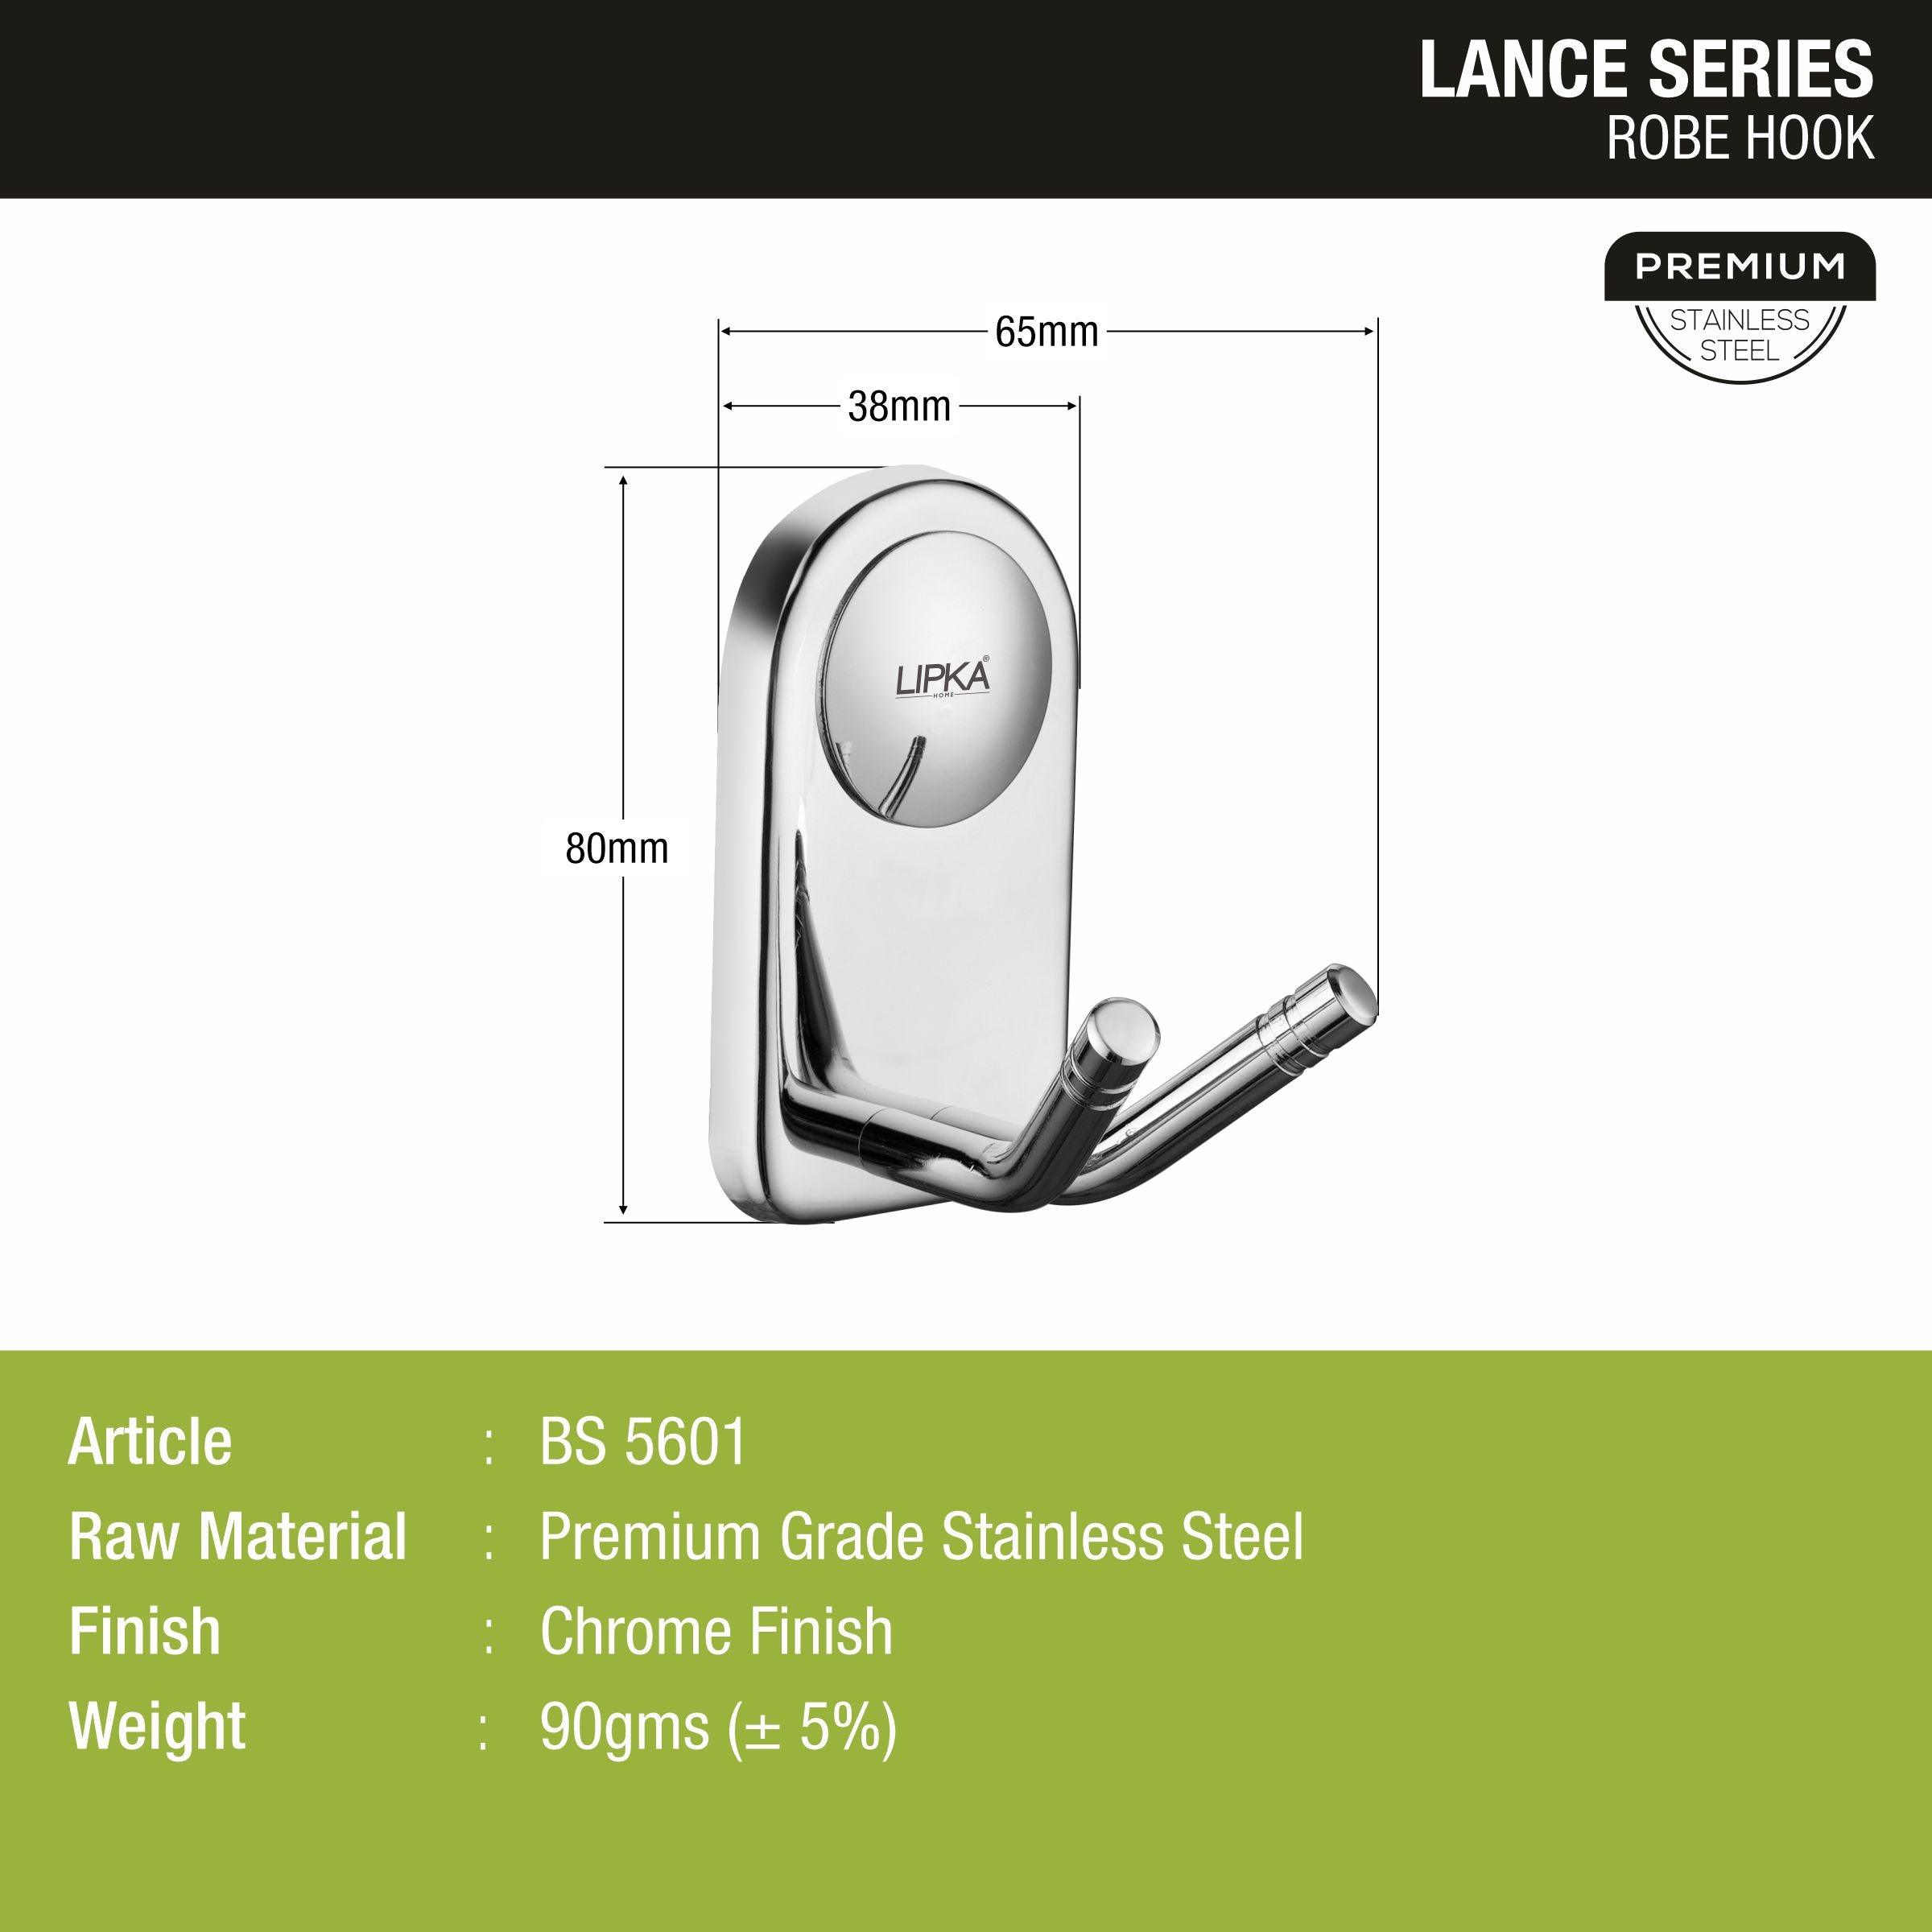 Lance Robe Hook sizes and dimensions